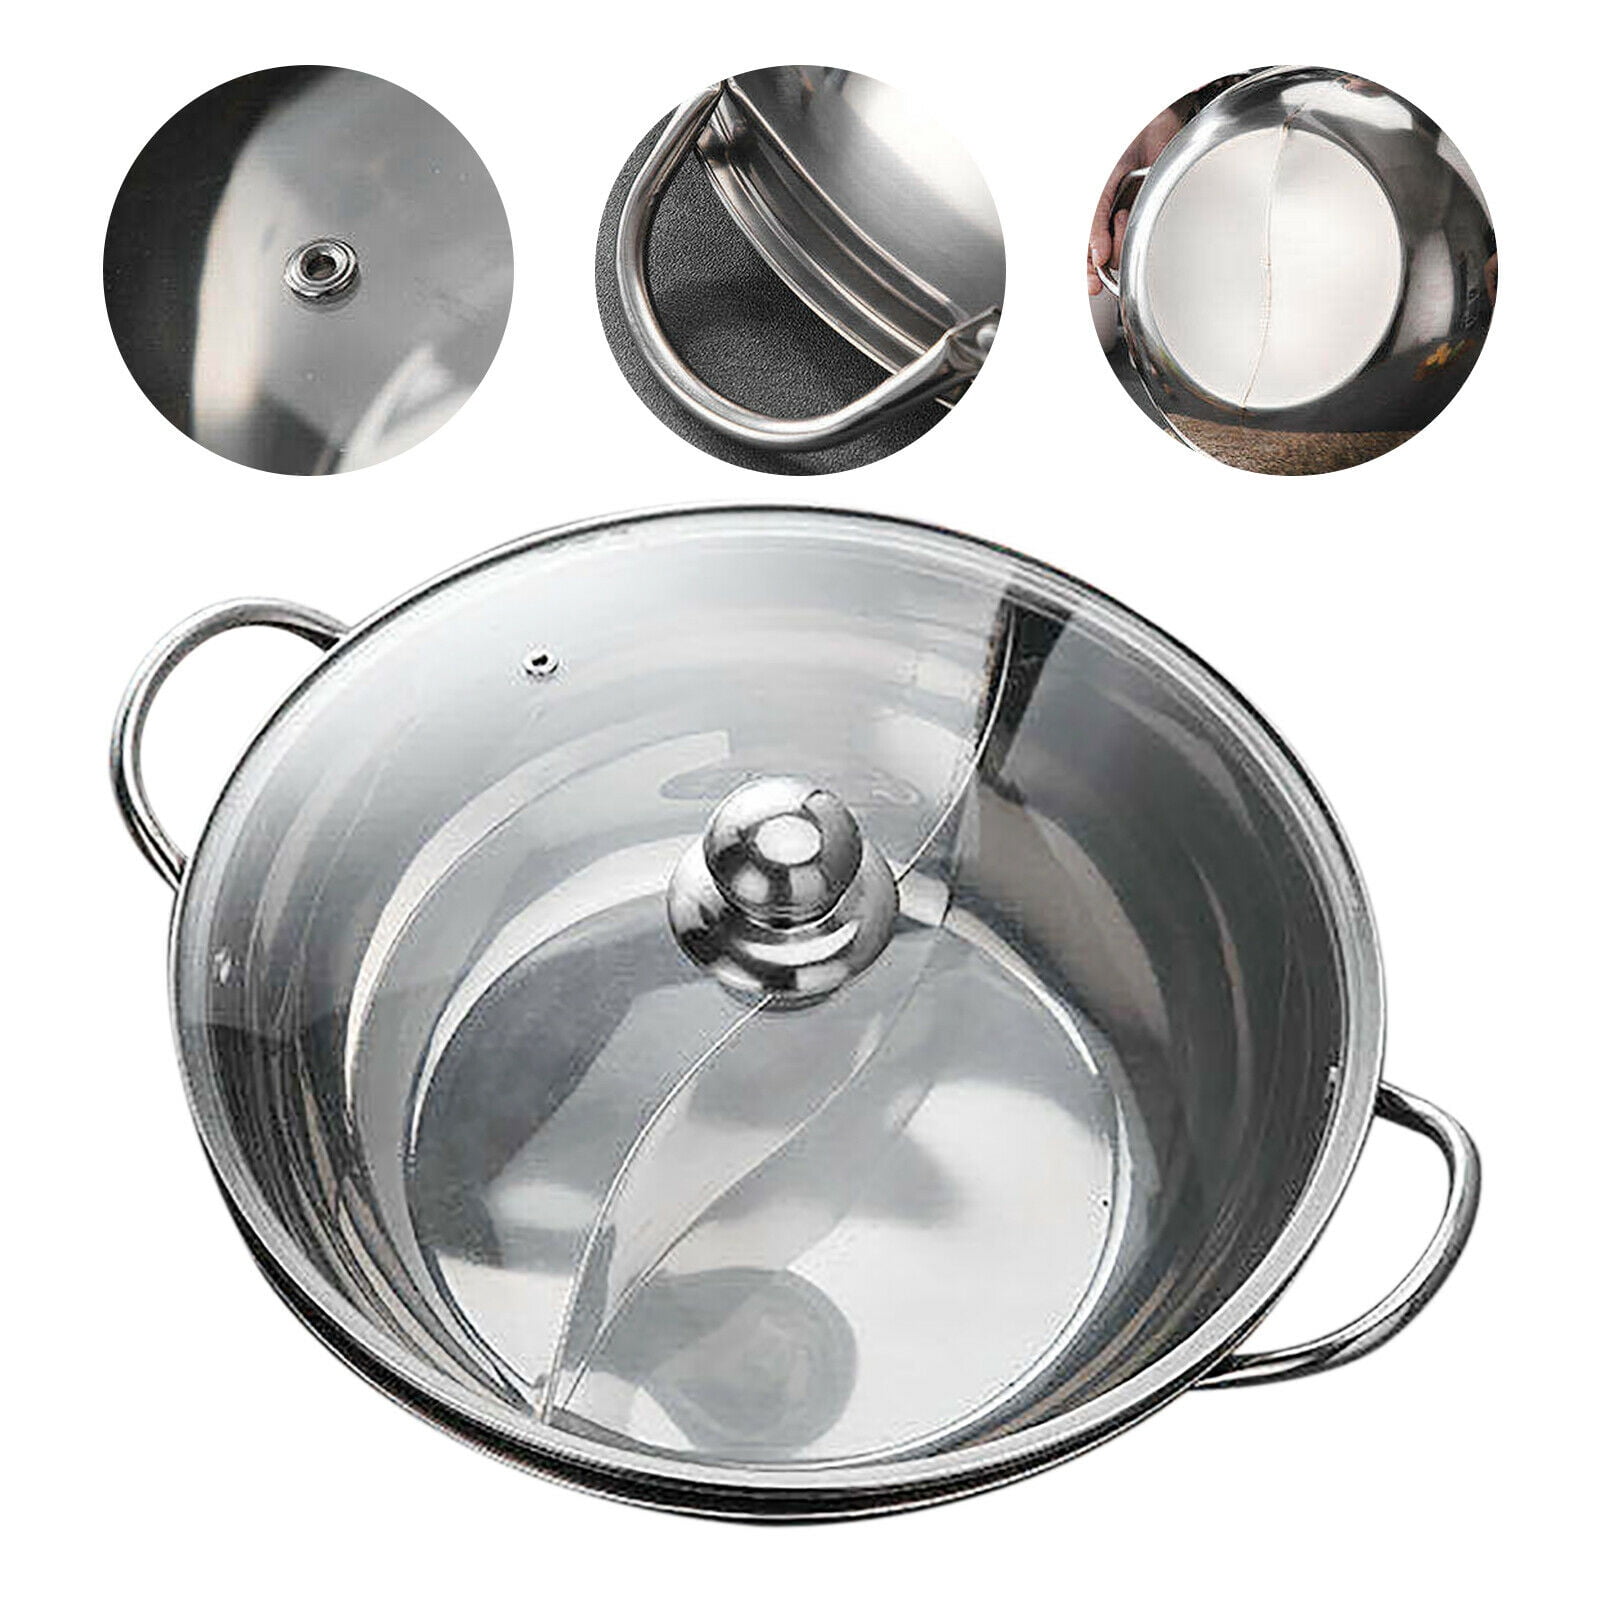 BESTONZON Hot Pot with Divider Stainless Steel Hot Pot Divided Hot Pot Pan  Household Hot Pot Stock Pot